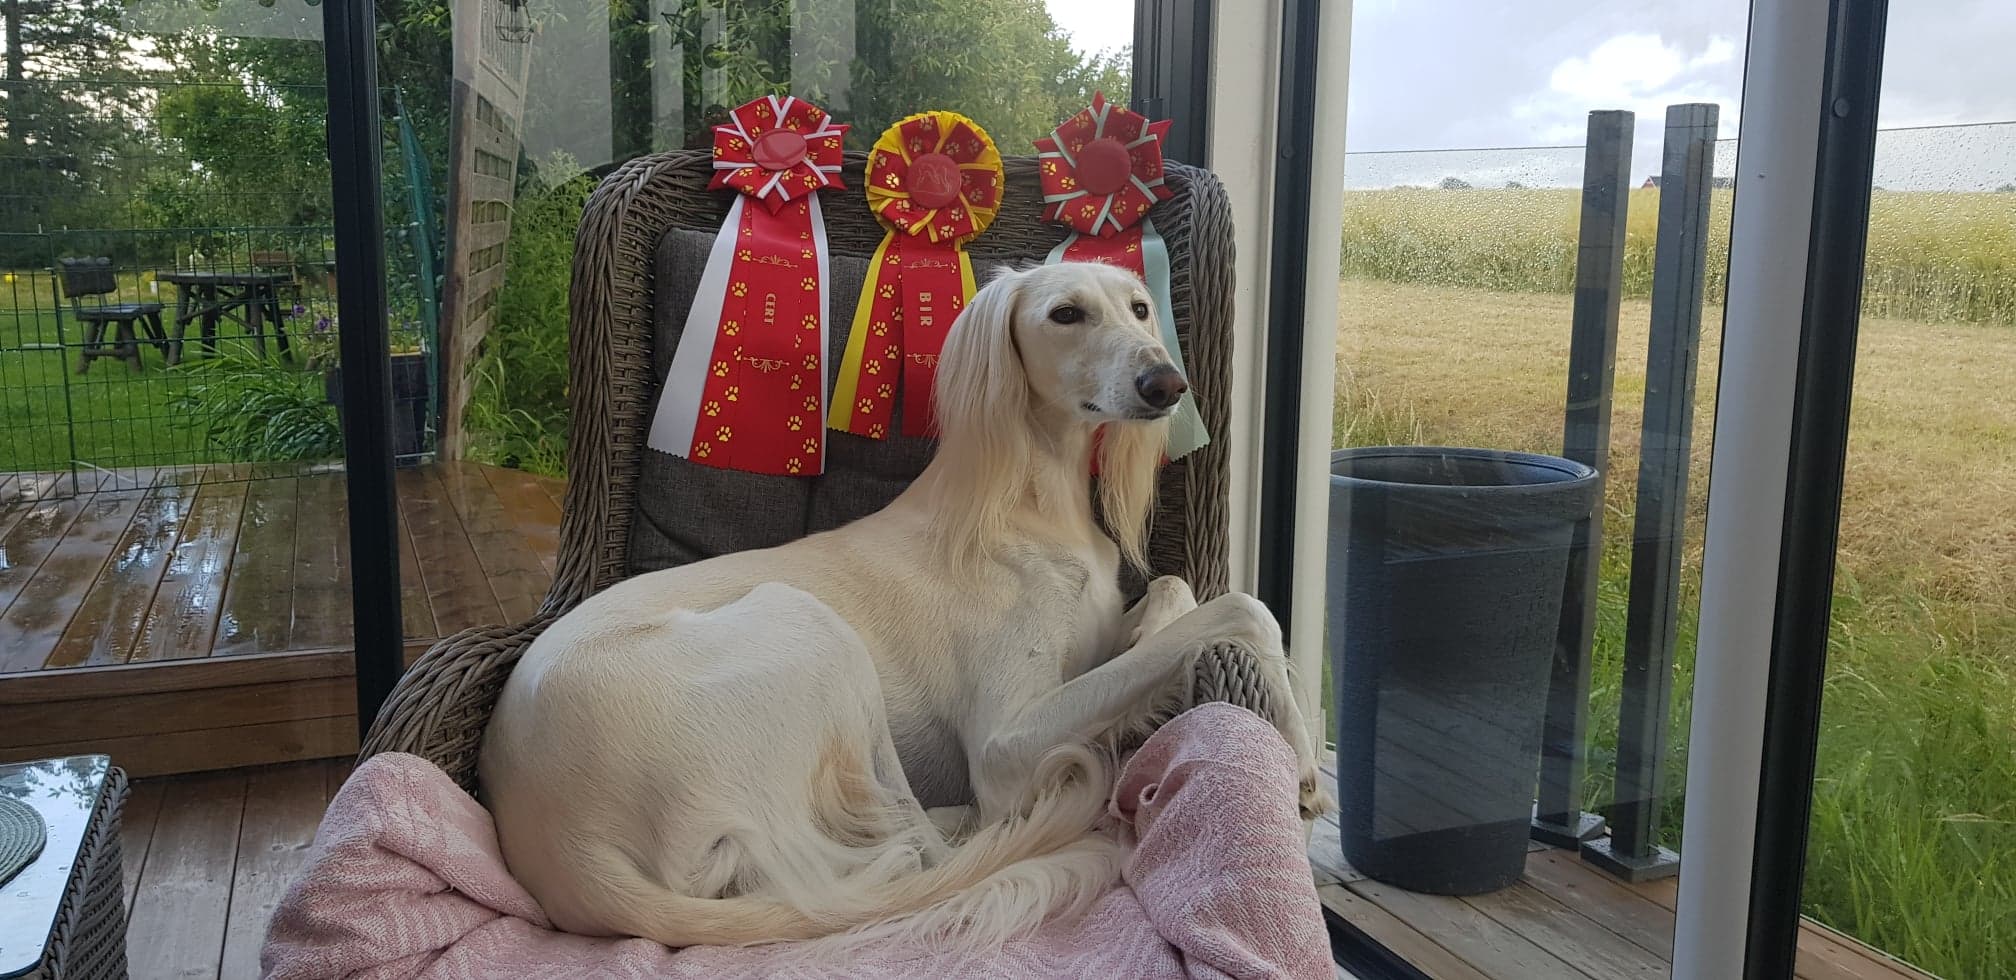 Frost won BOB and CAC today at the Danish Sighthound Club show under judge Knut Fr Blütecher (Showline Hounds), Norway. He is now Danish and Swedish champion! Huge congratulations to Gunilla and Micke =)